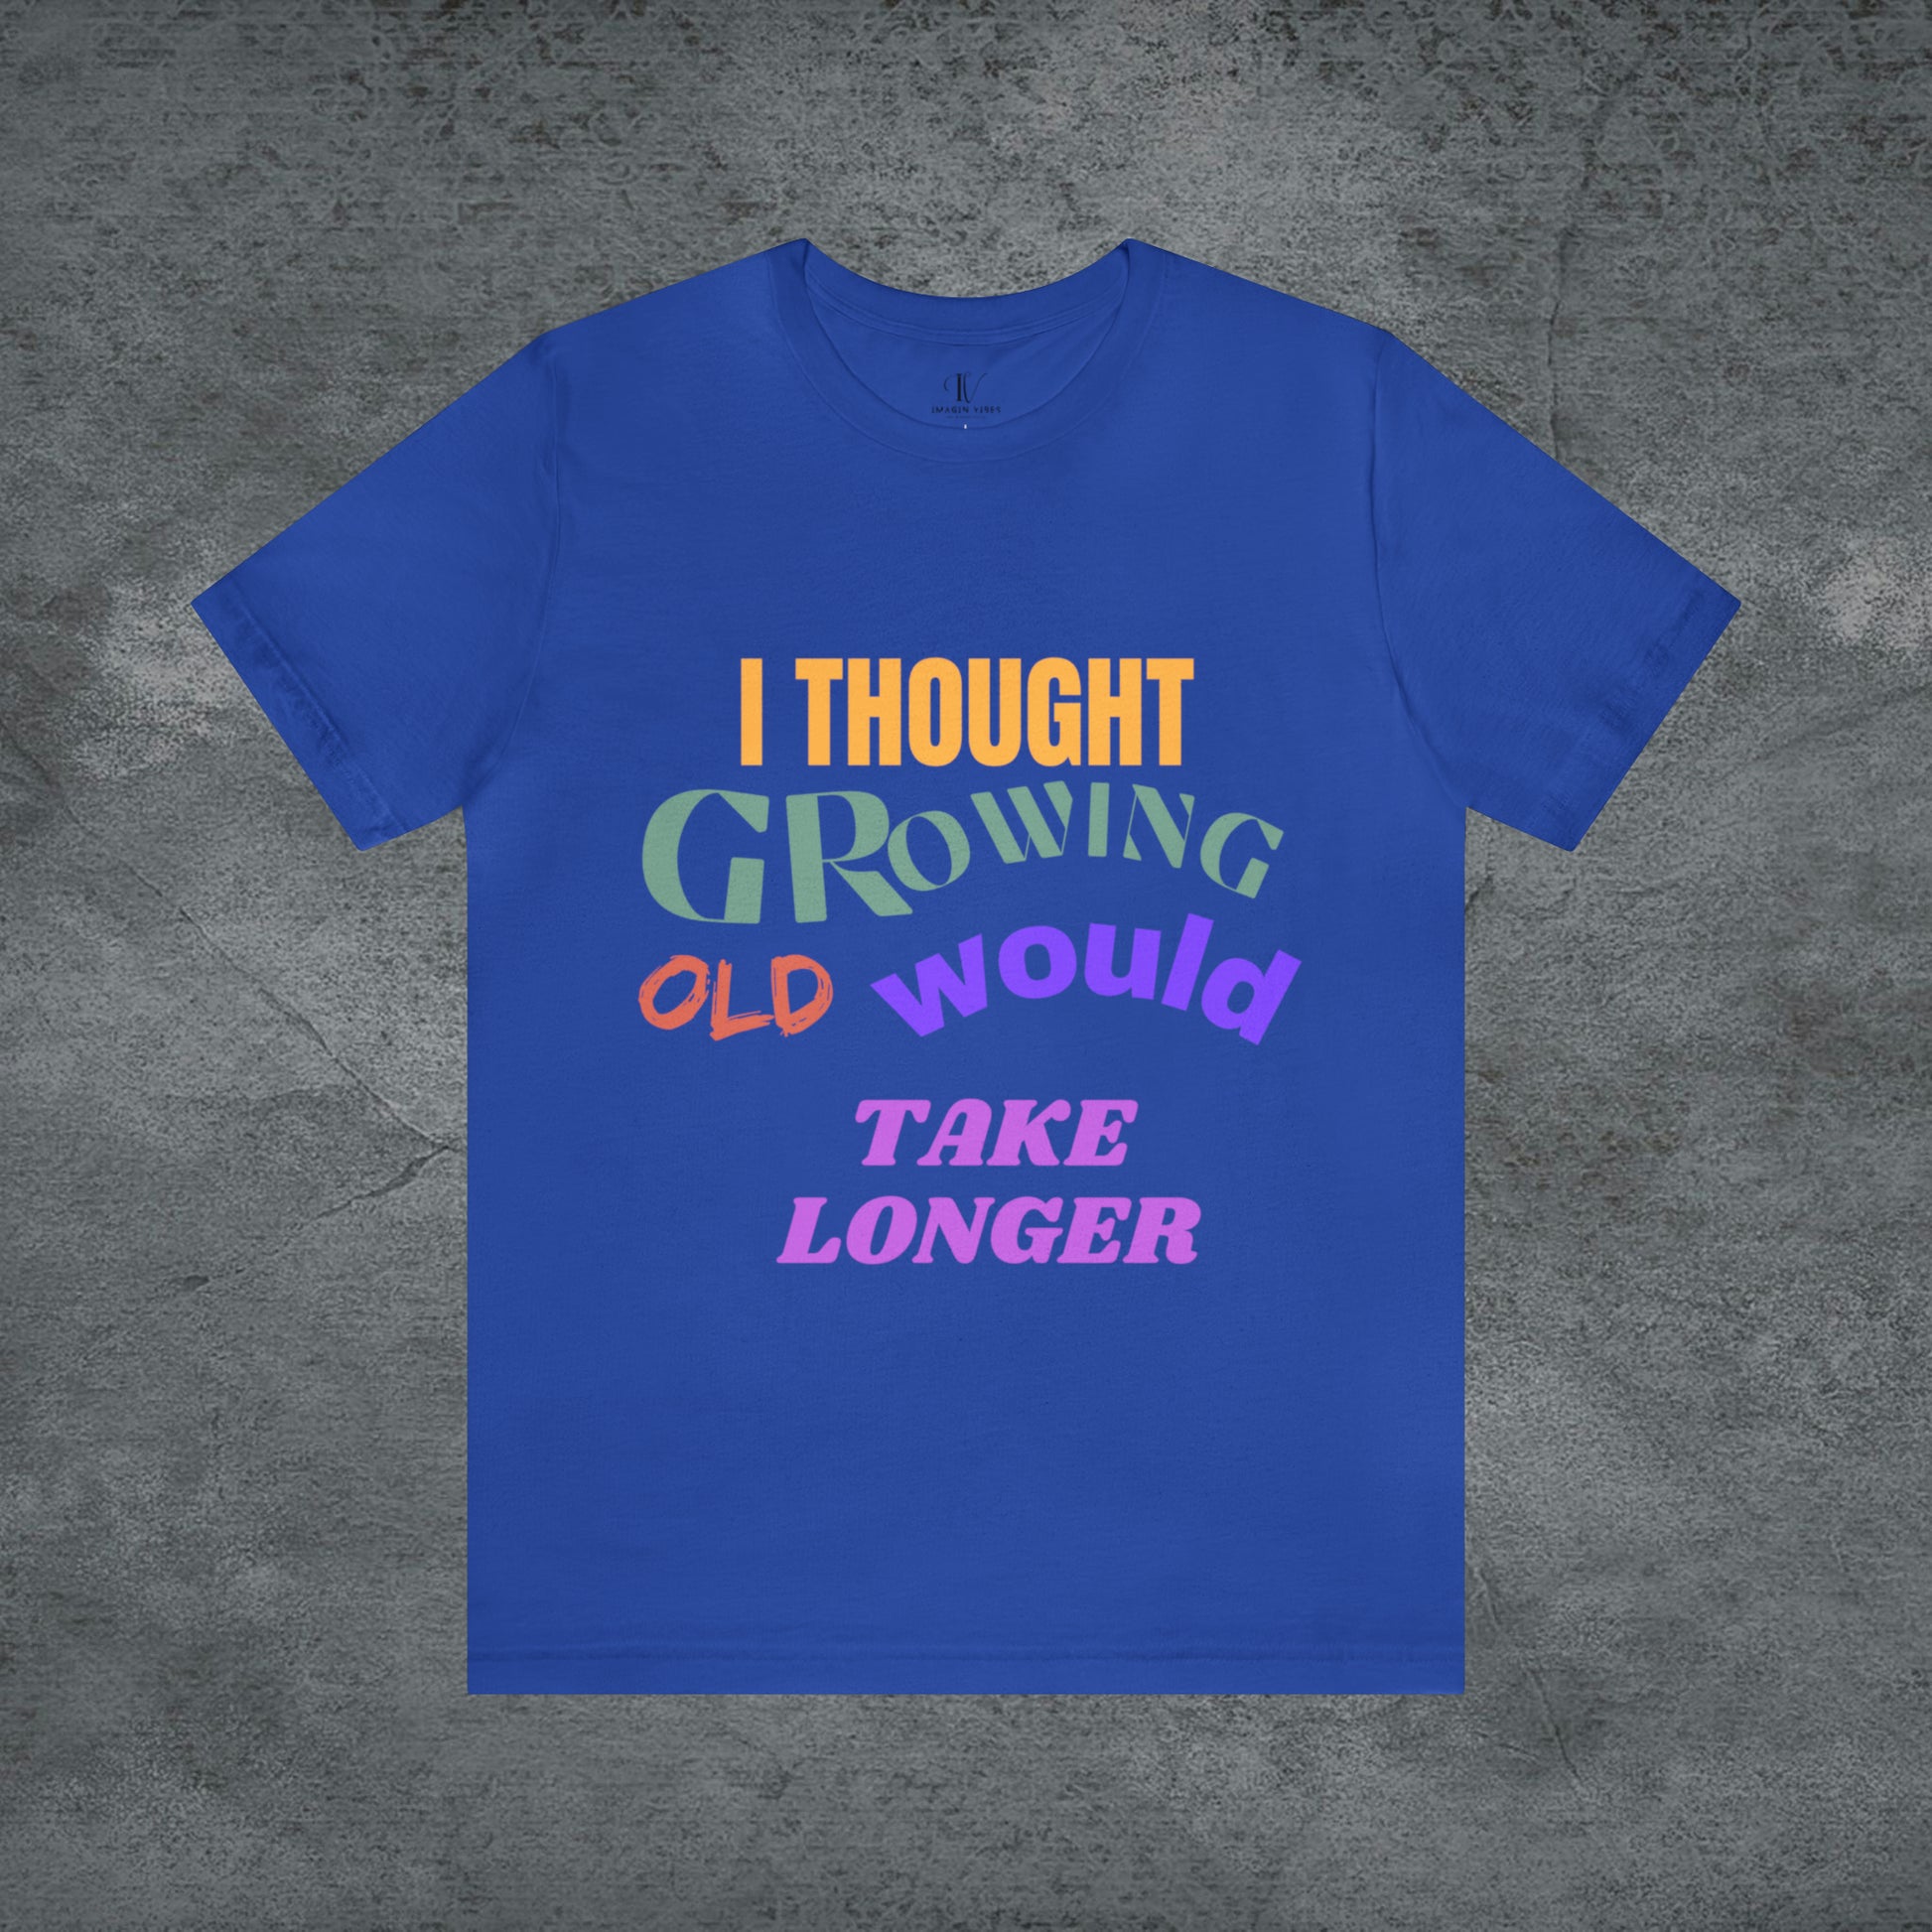 I Thought Growing Old Would Take Longer T-Shirt - Getting Older T-Shirt - Funny Adulting Tee - Old Age T-Shirt - Old Person T-Shirt T-Shirt True Royal S 